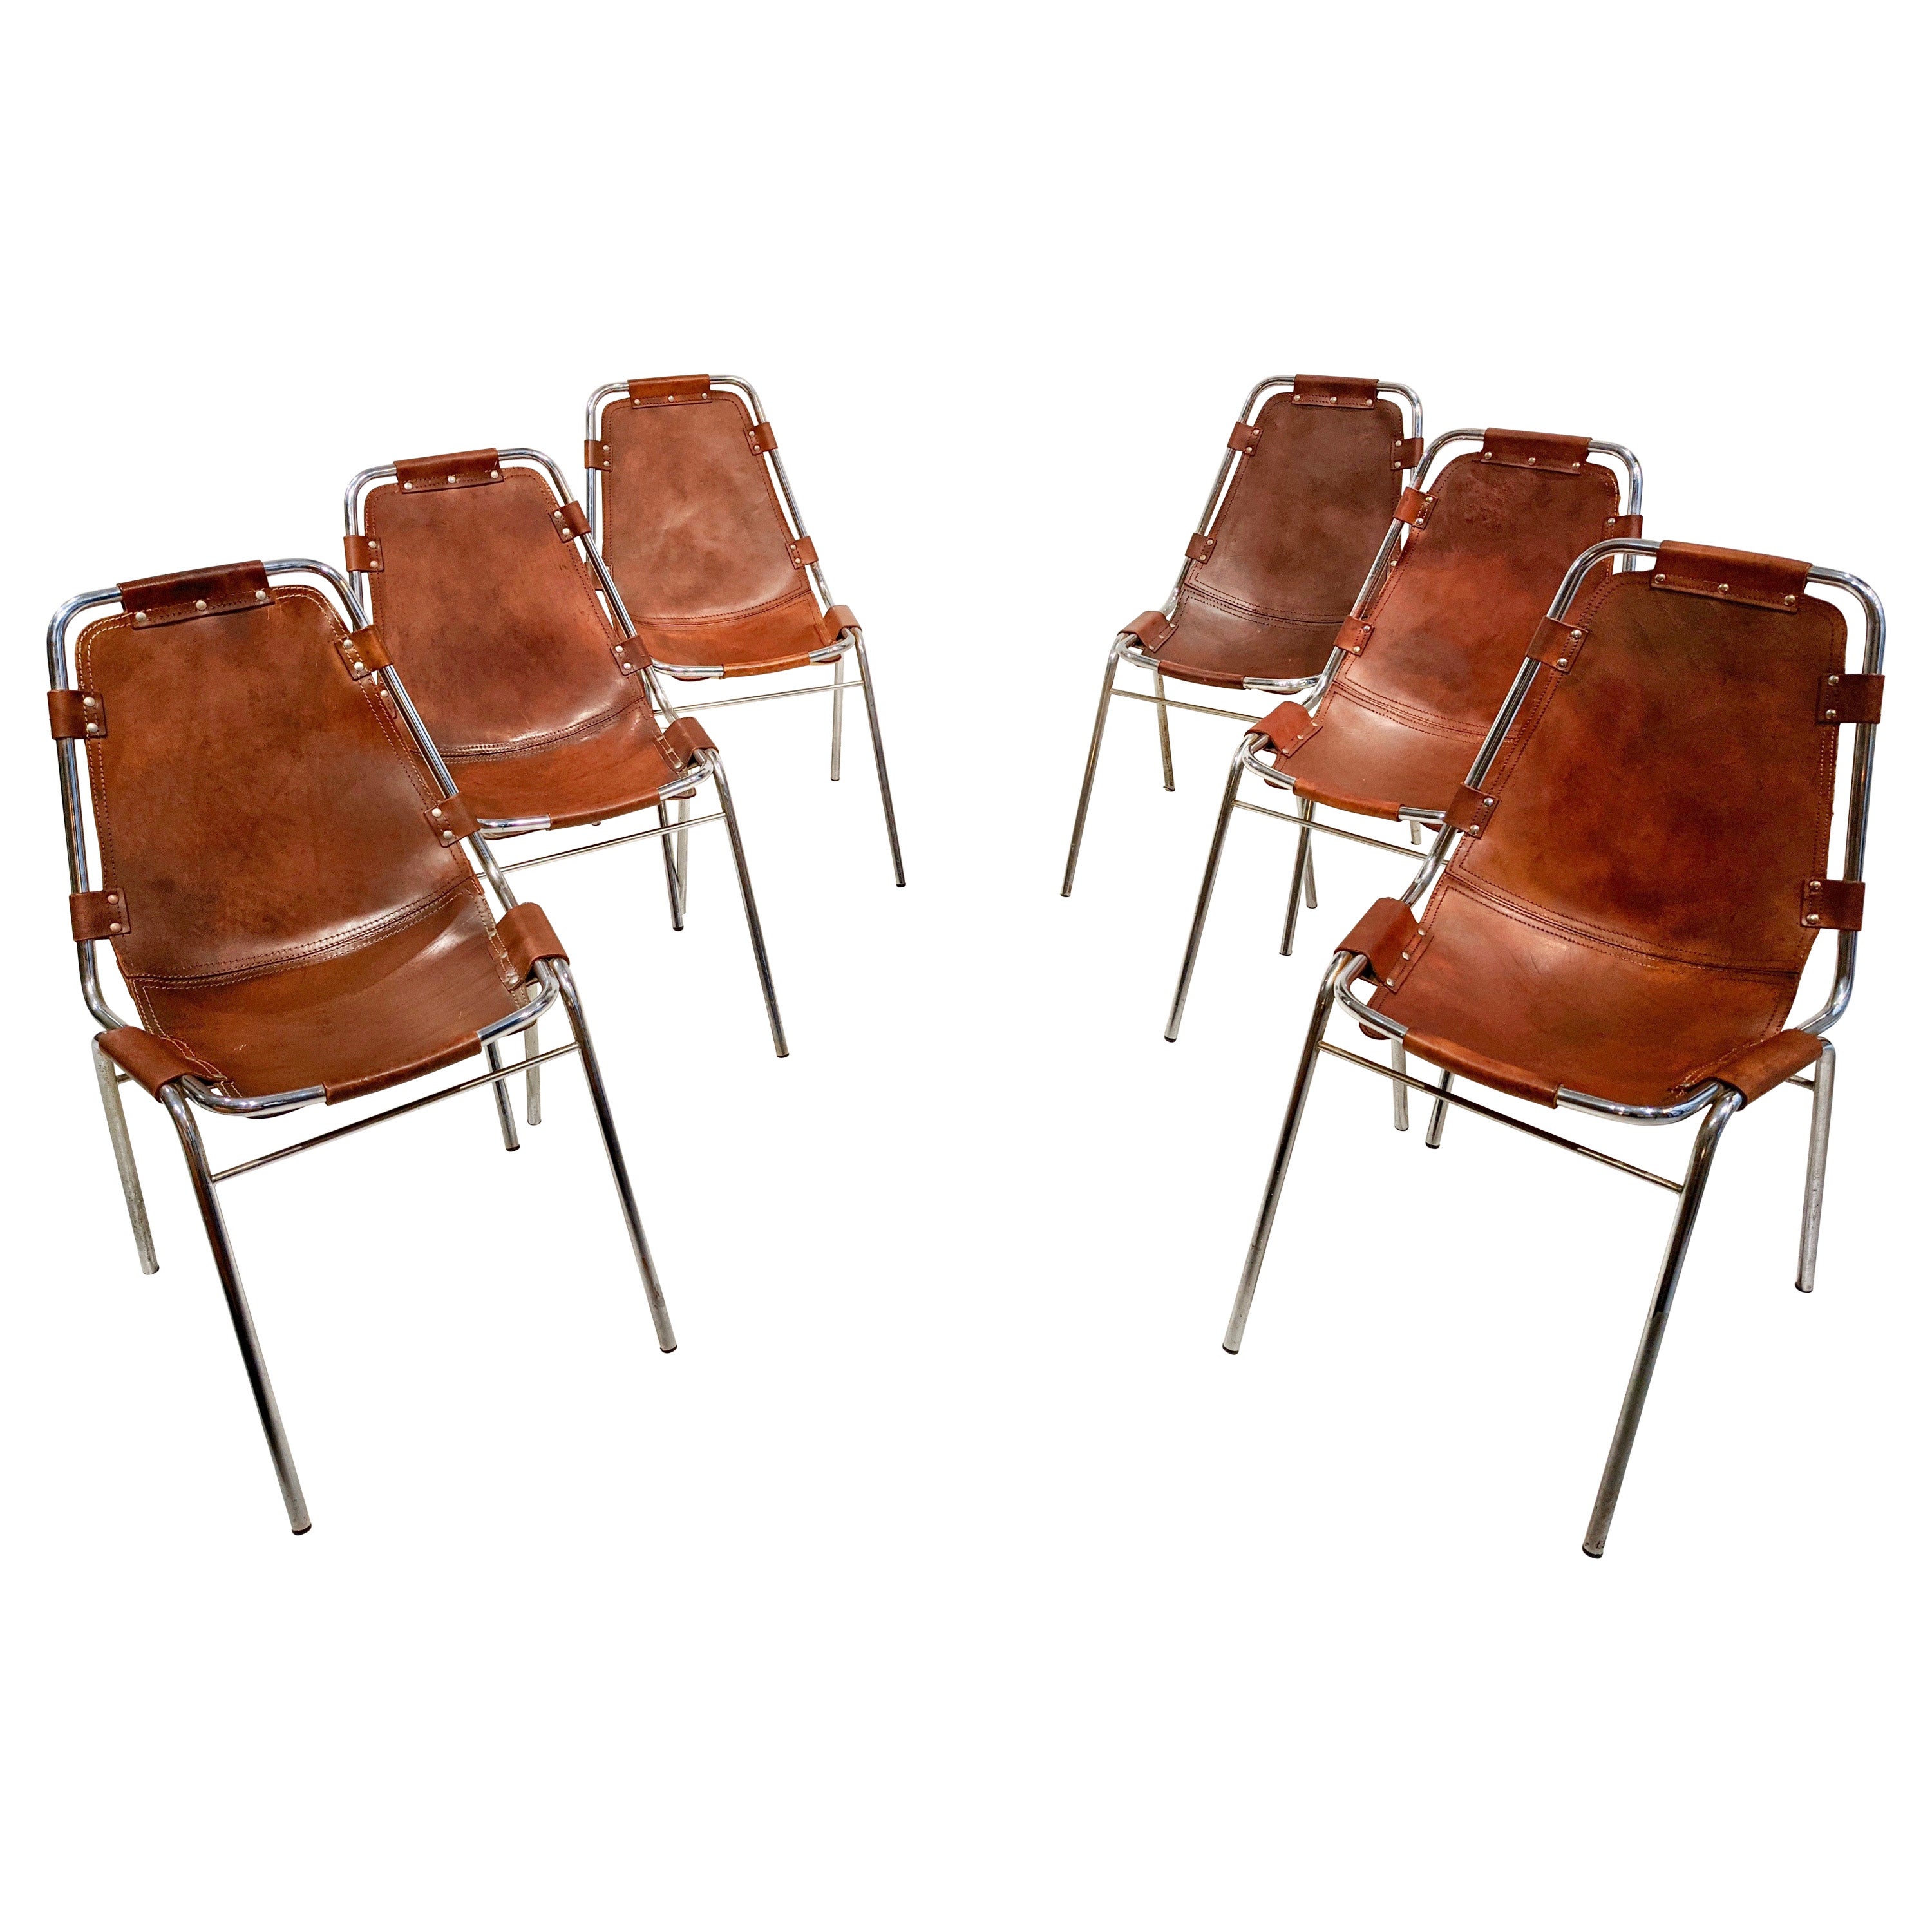 Charlotte perriand Leather Chairs 